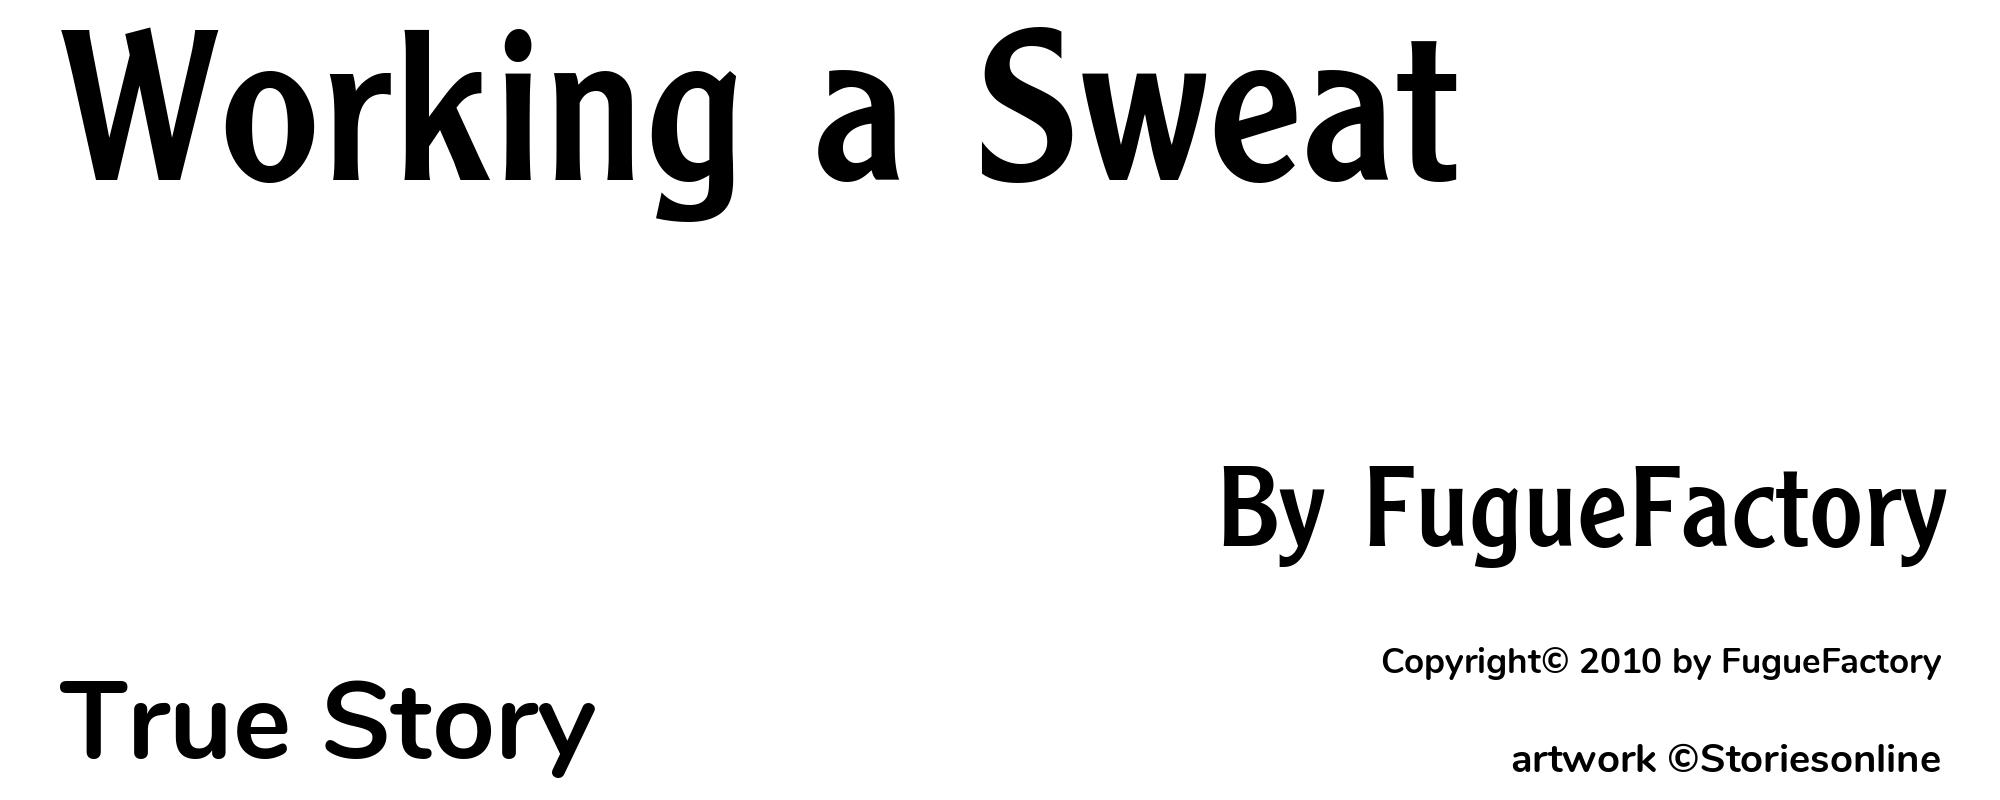 Working a Sweat - Cover